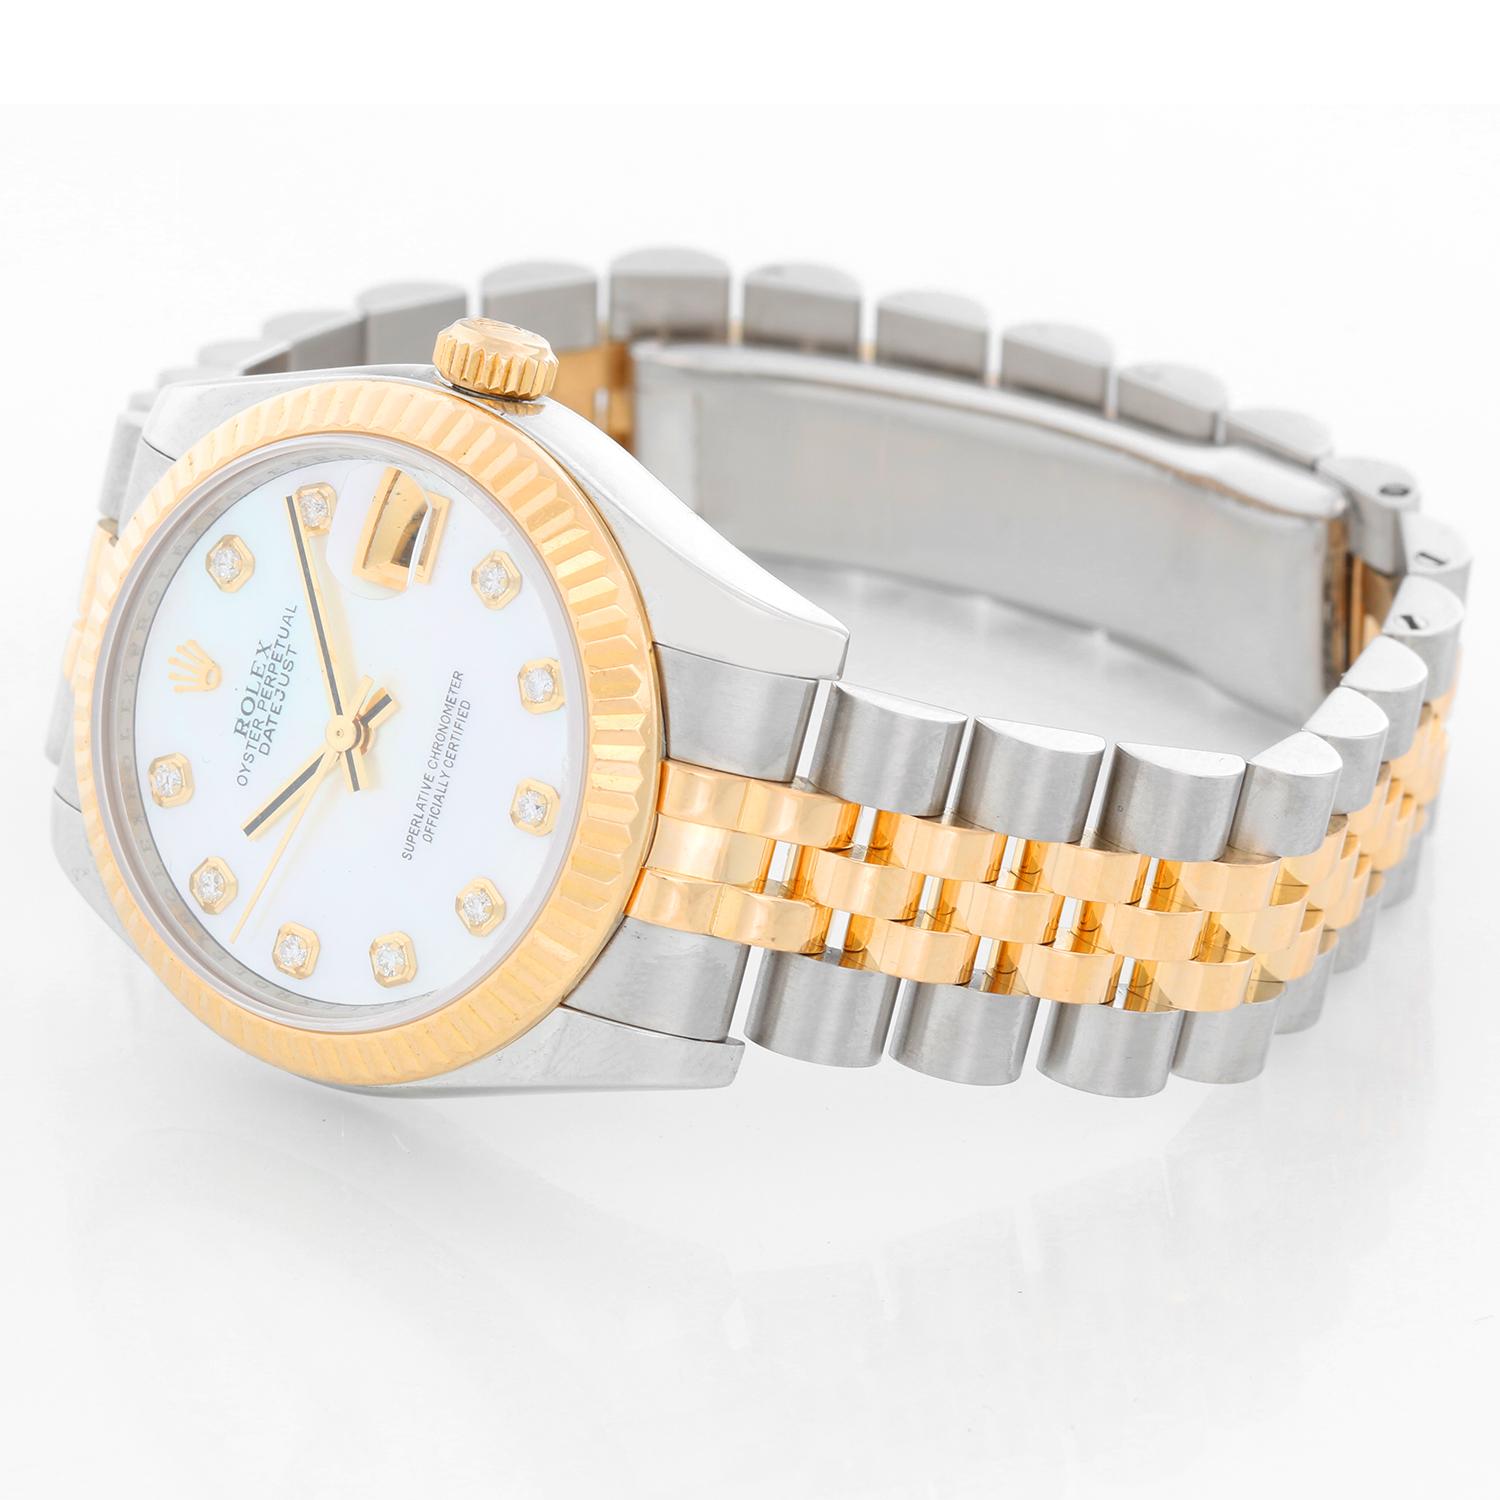 Rolex Datejust Midsize 2-Tone Watch 178273 - Automatic winding; 31 jewel; sapphire crystal. Stainless steel case with yellow gold fluted bezel.. Custom Mother of Pearl . Stainless steel hidden-clasp Jubilee bracelet. Pre-owned with Rolex box and